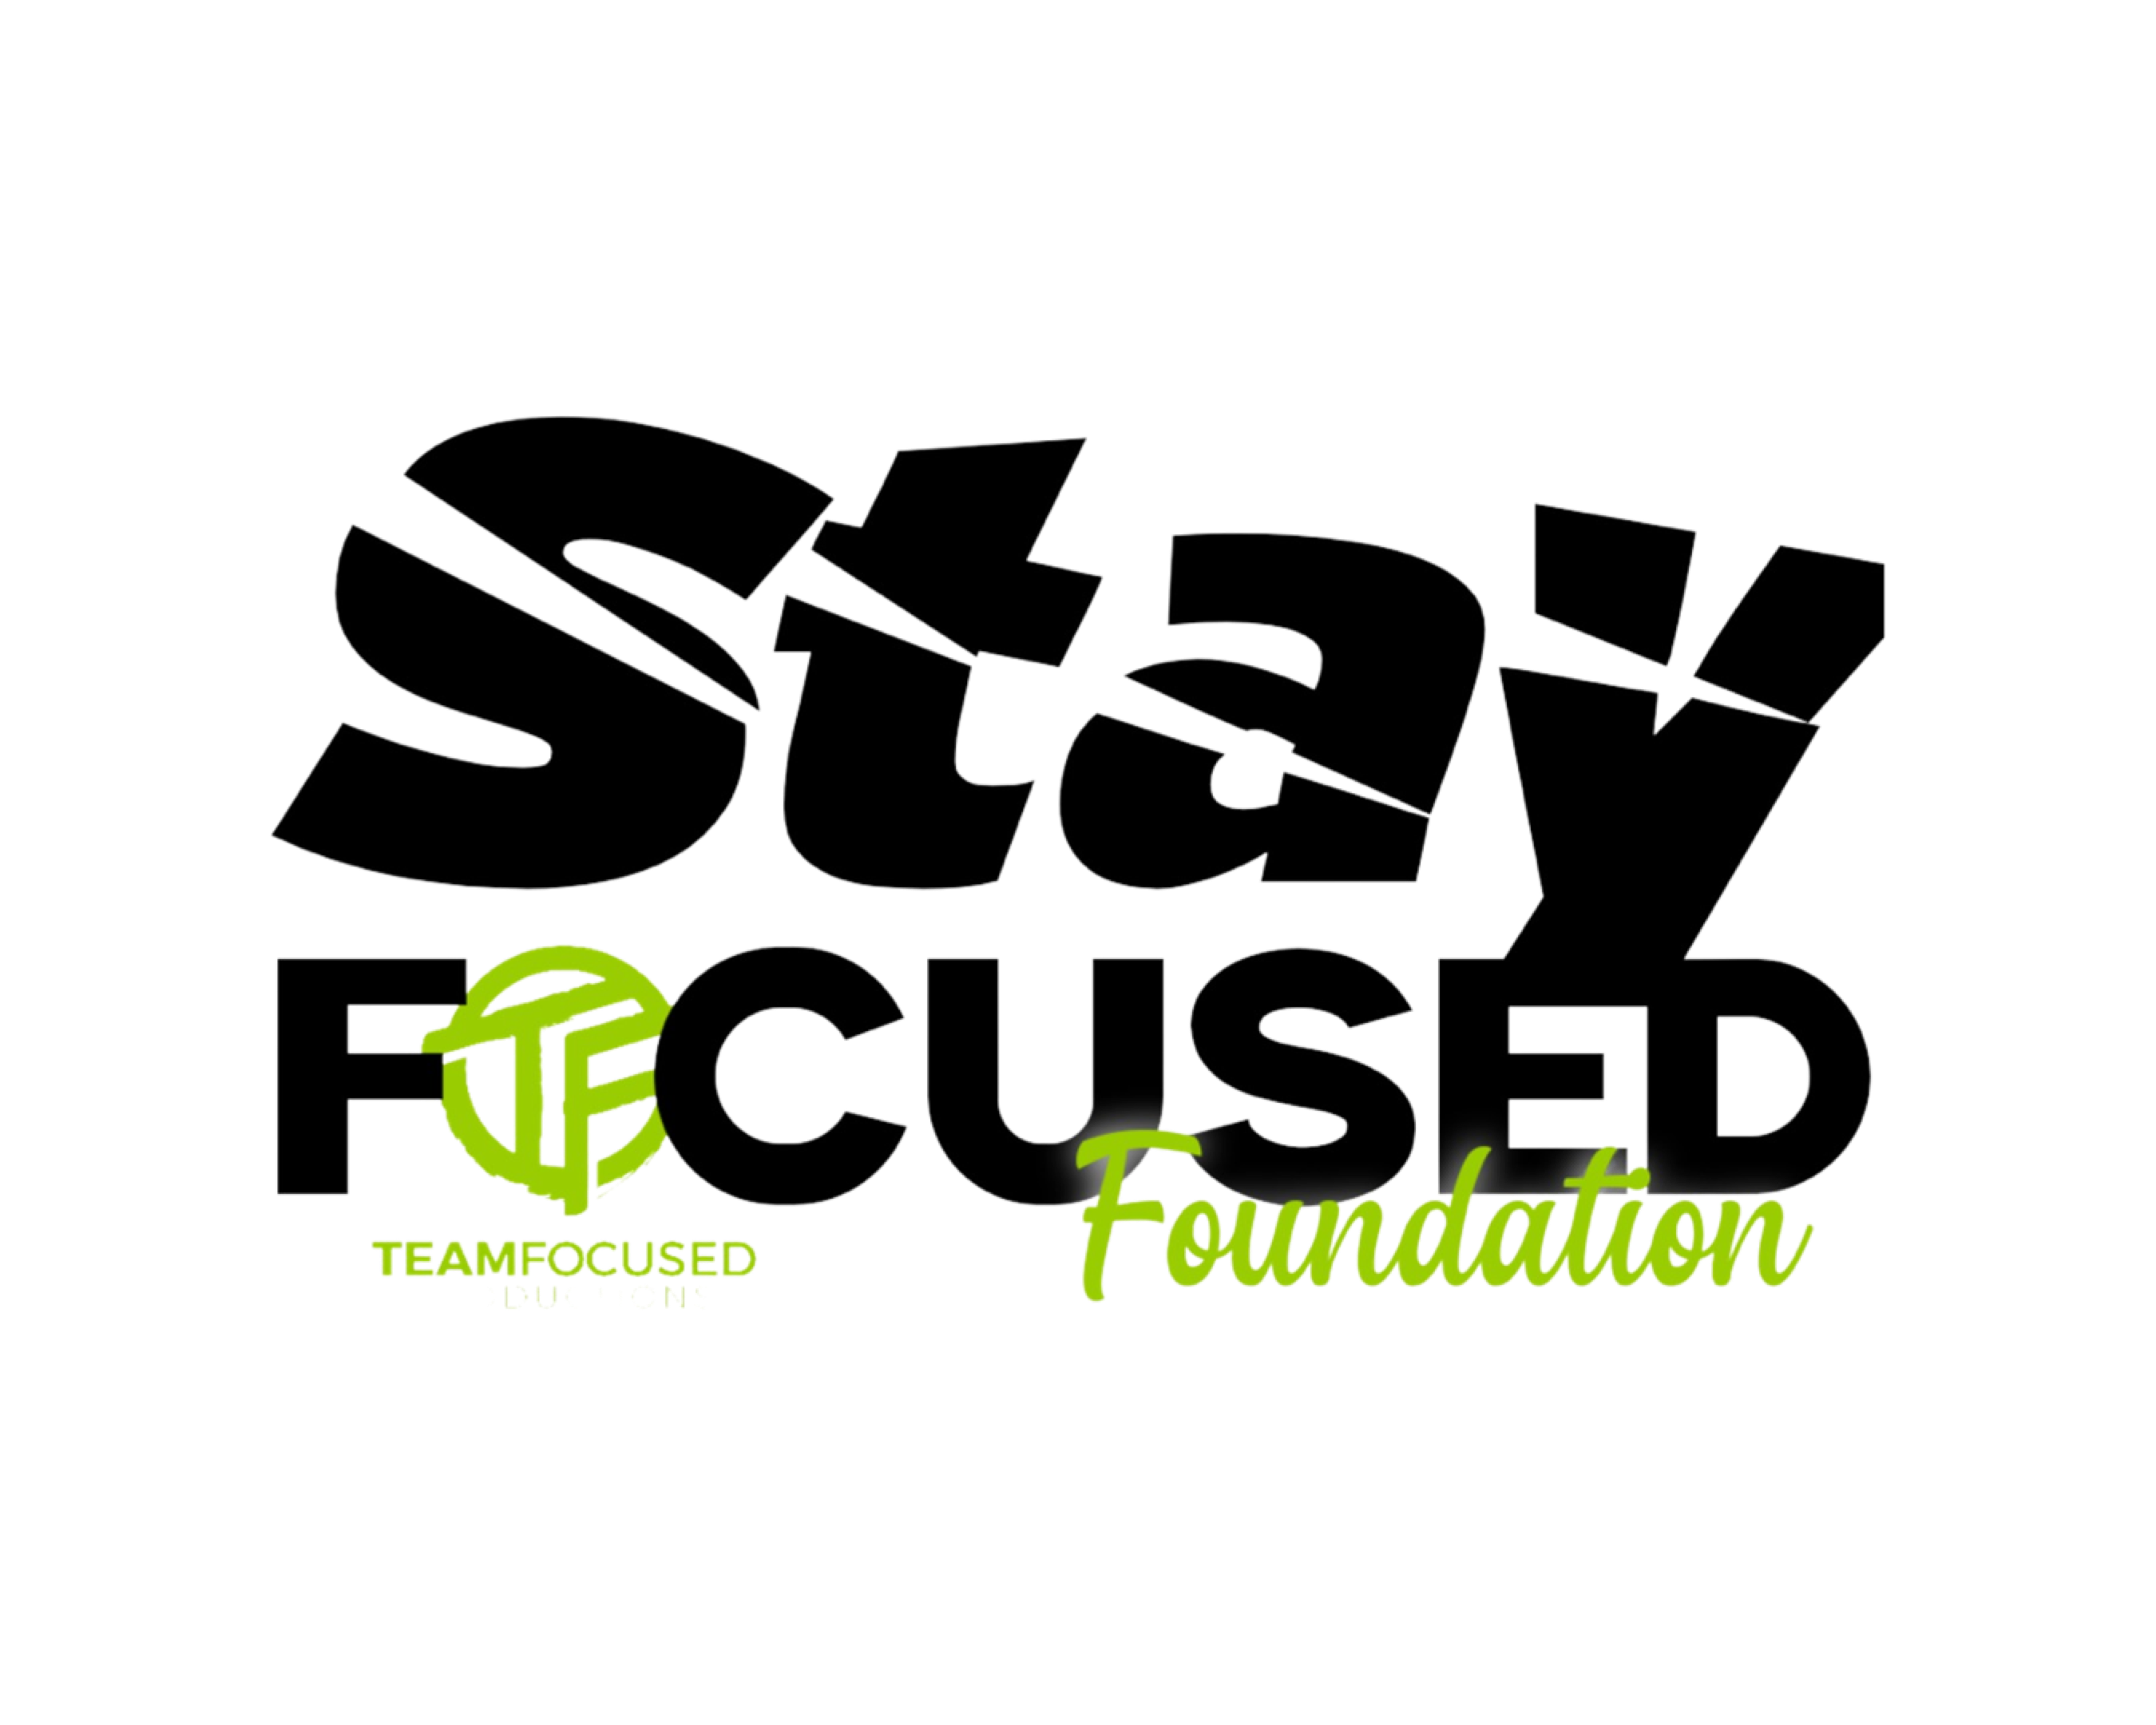 Load video: TeamFocused Production is the Home of the StayFocused Foundation